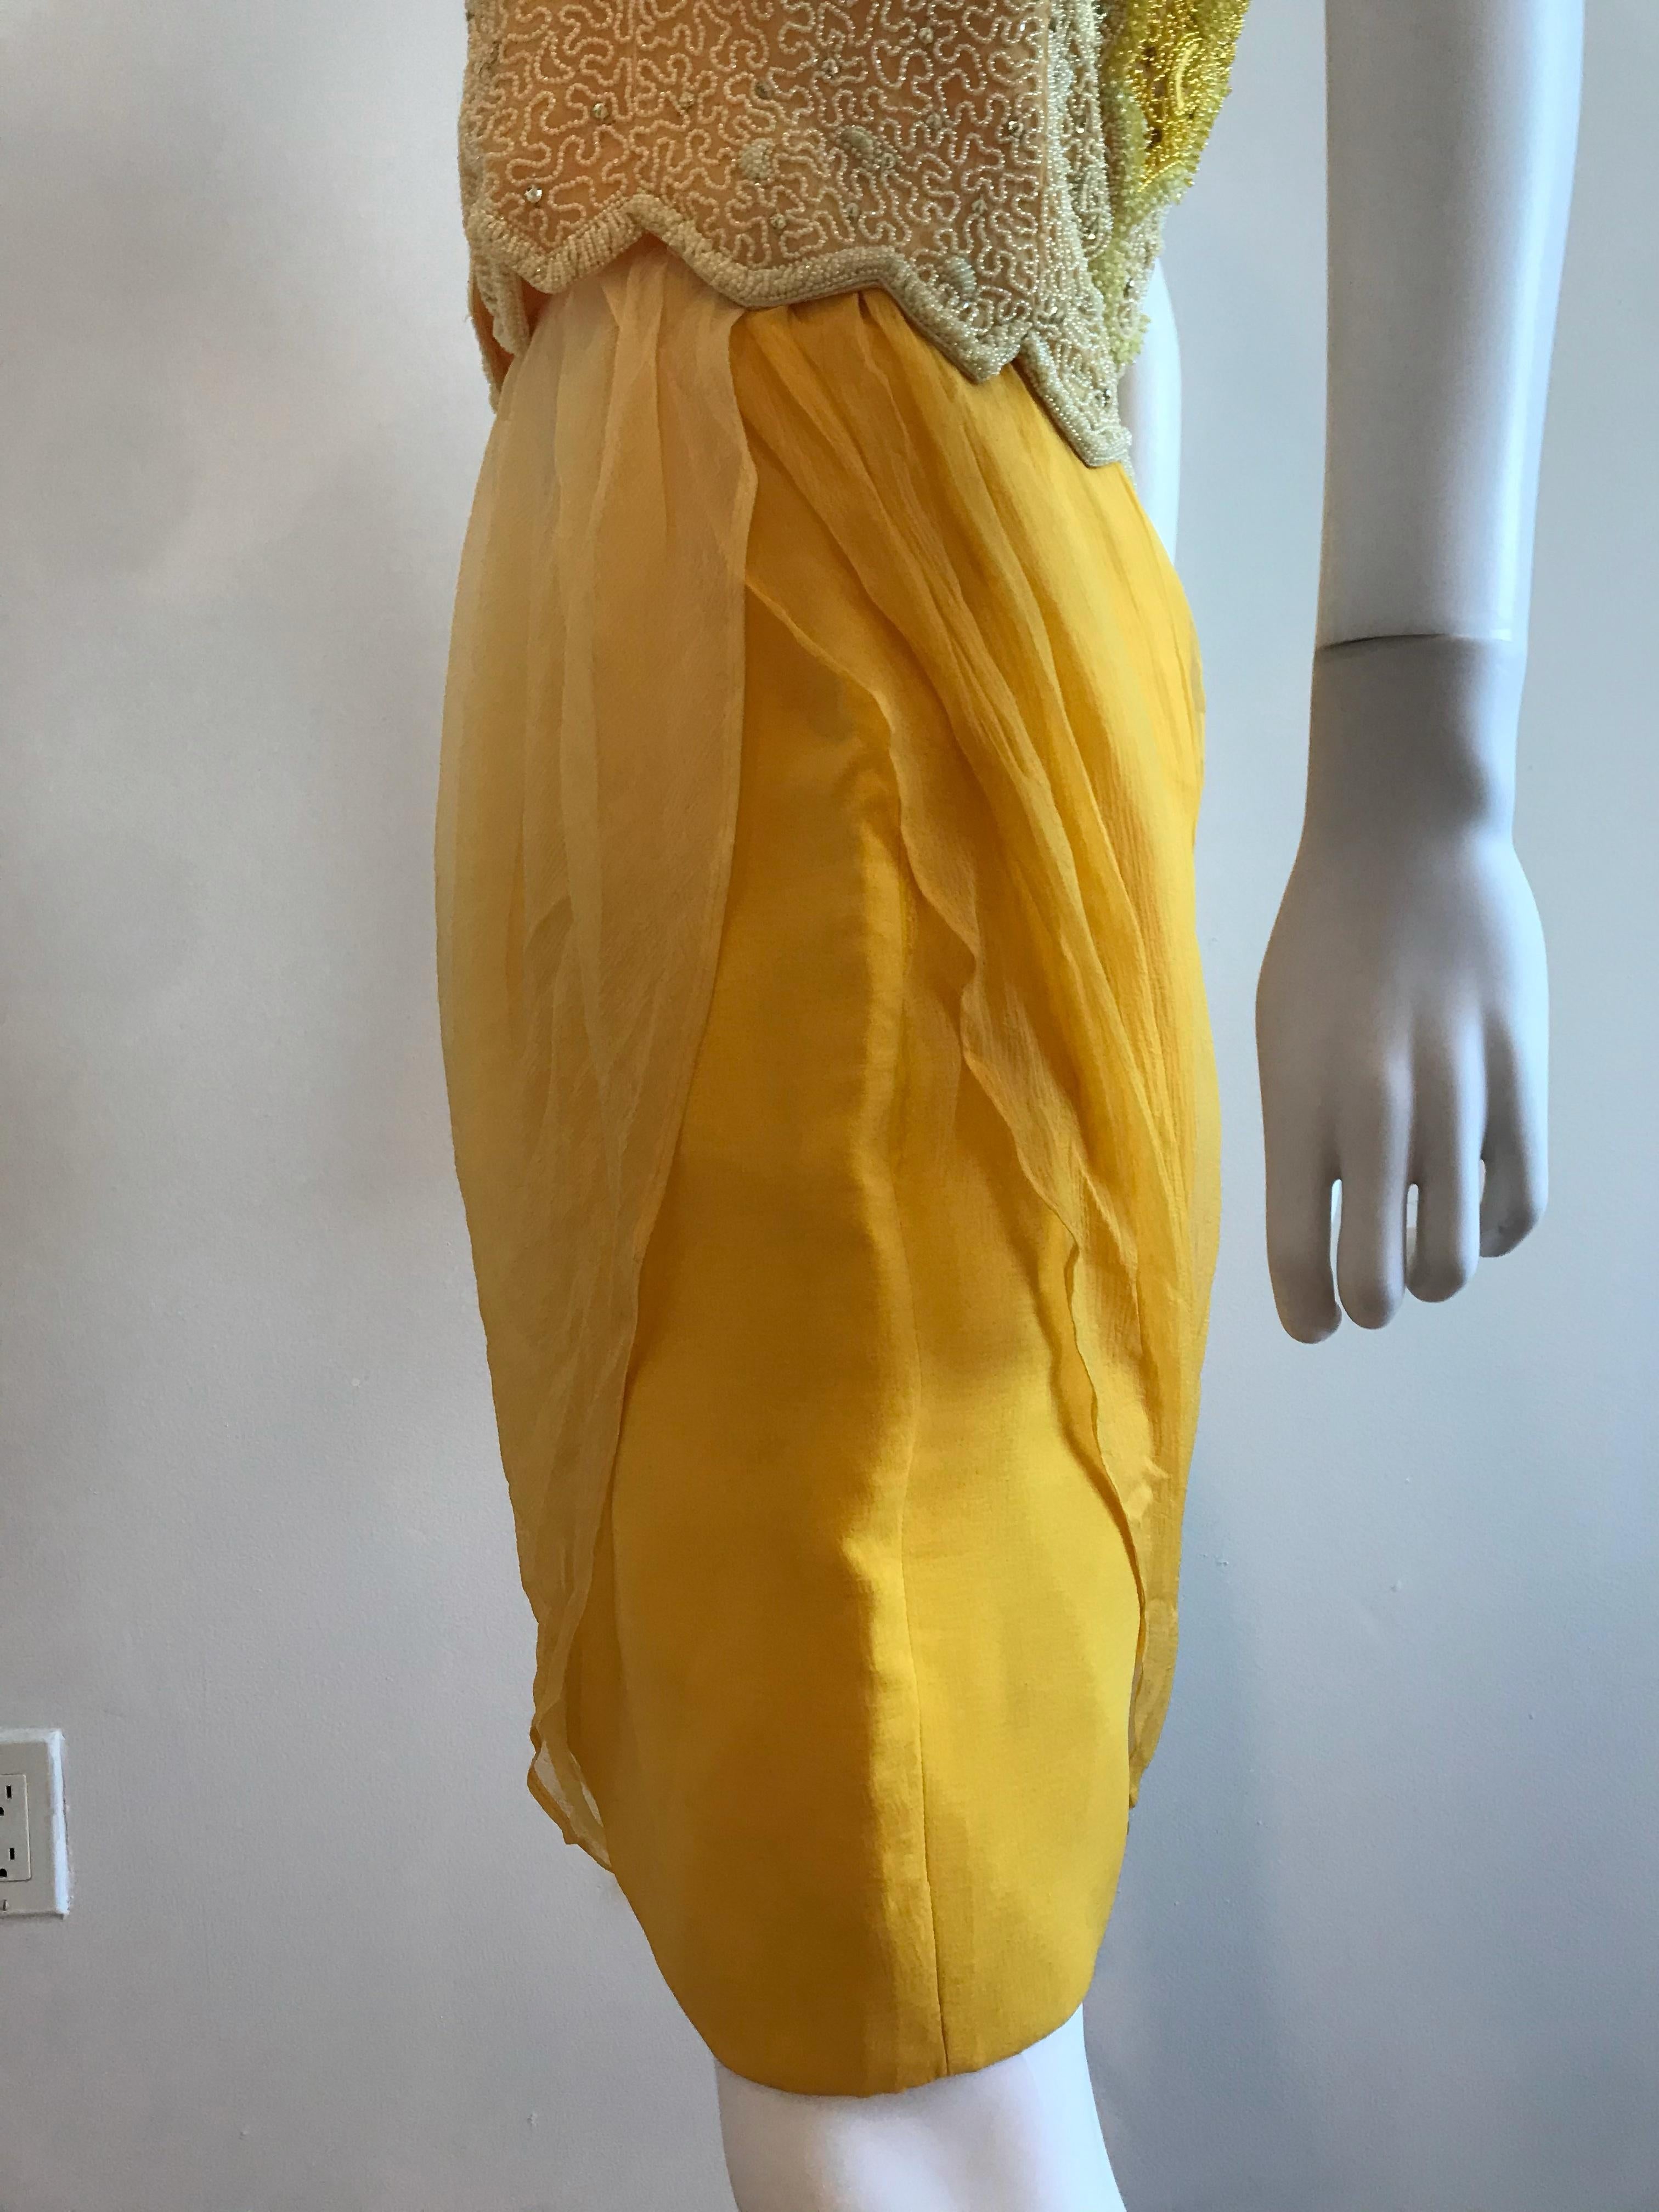 Gianni Versace for Genny Yellow Beaded Jacket and Chiffon Skirt Ensemble For Sale 1